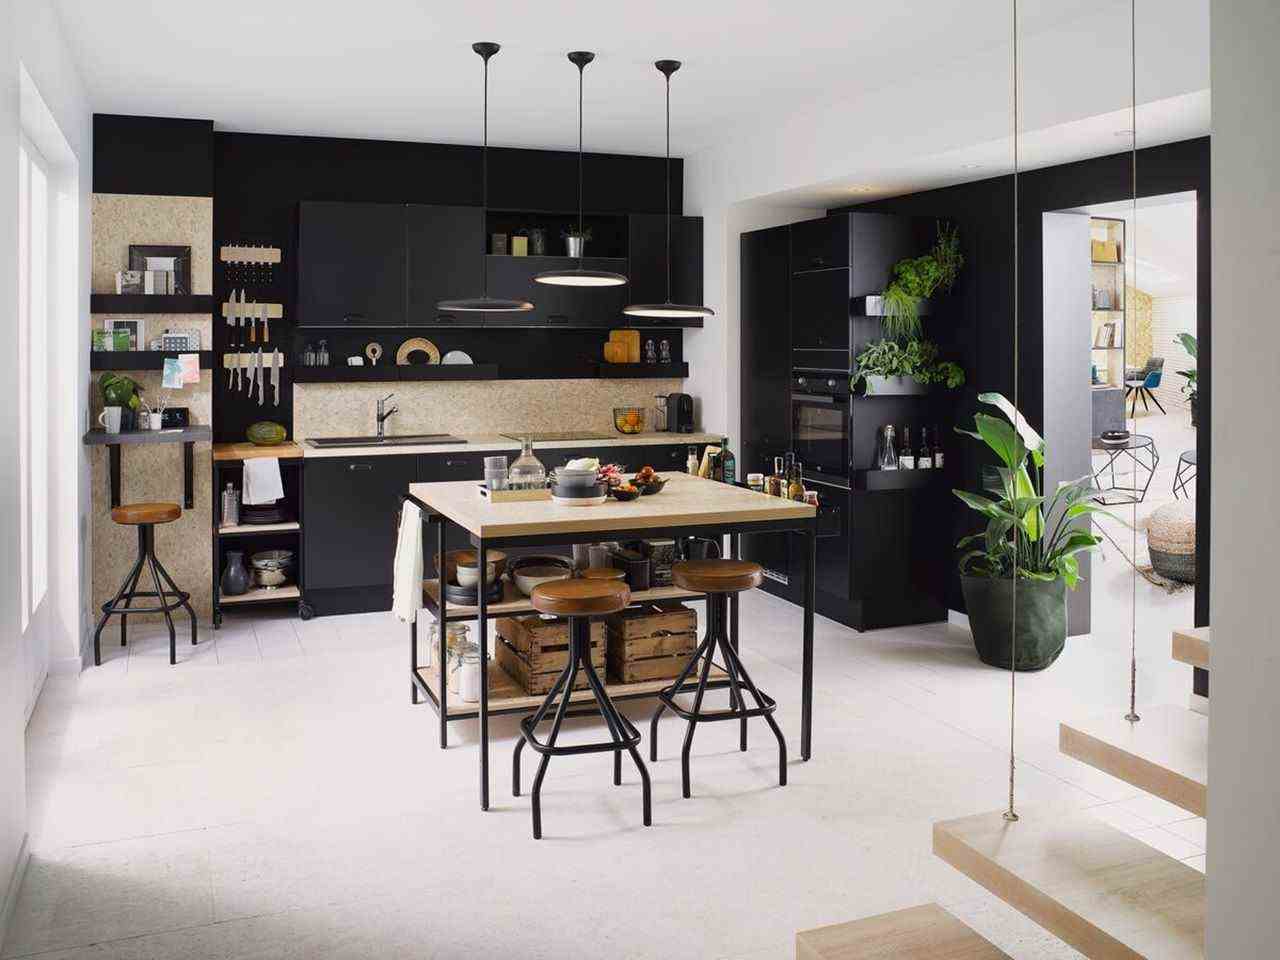 An Industrial Kitchen In Black And Osb